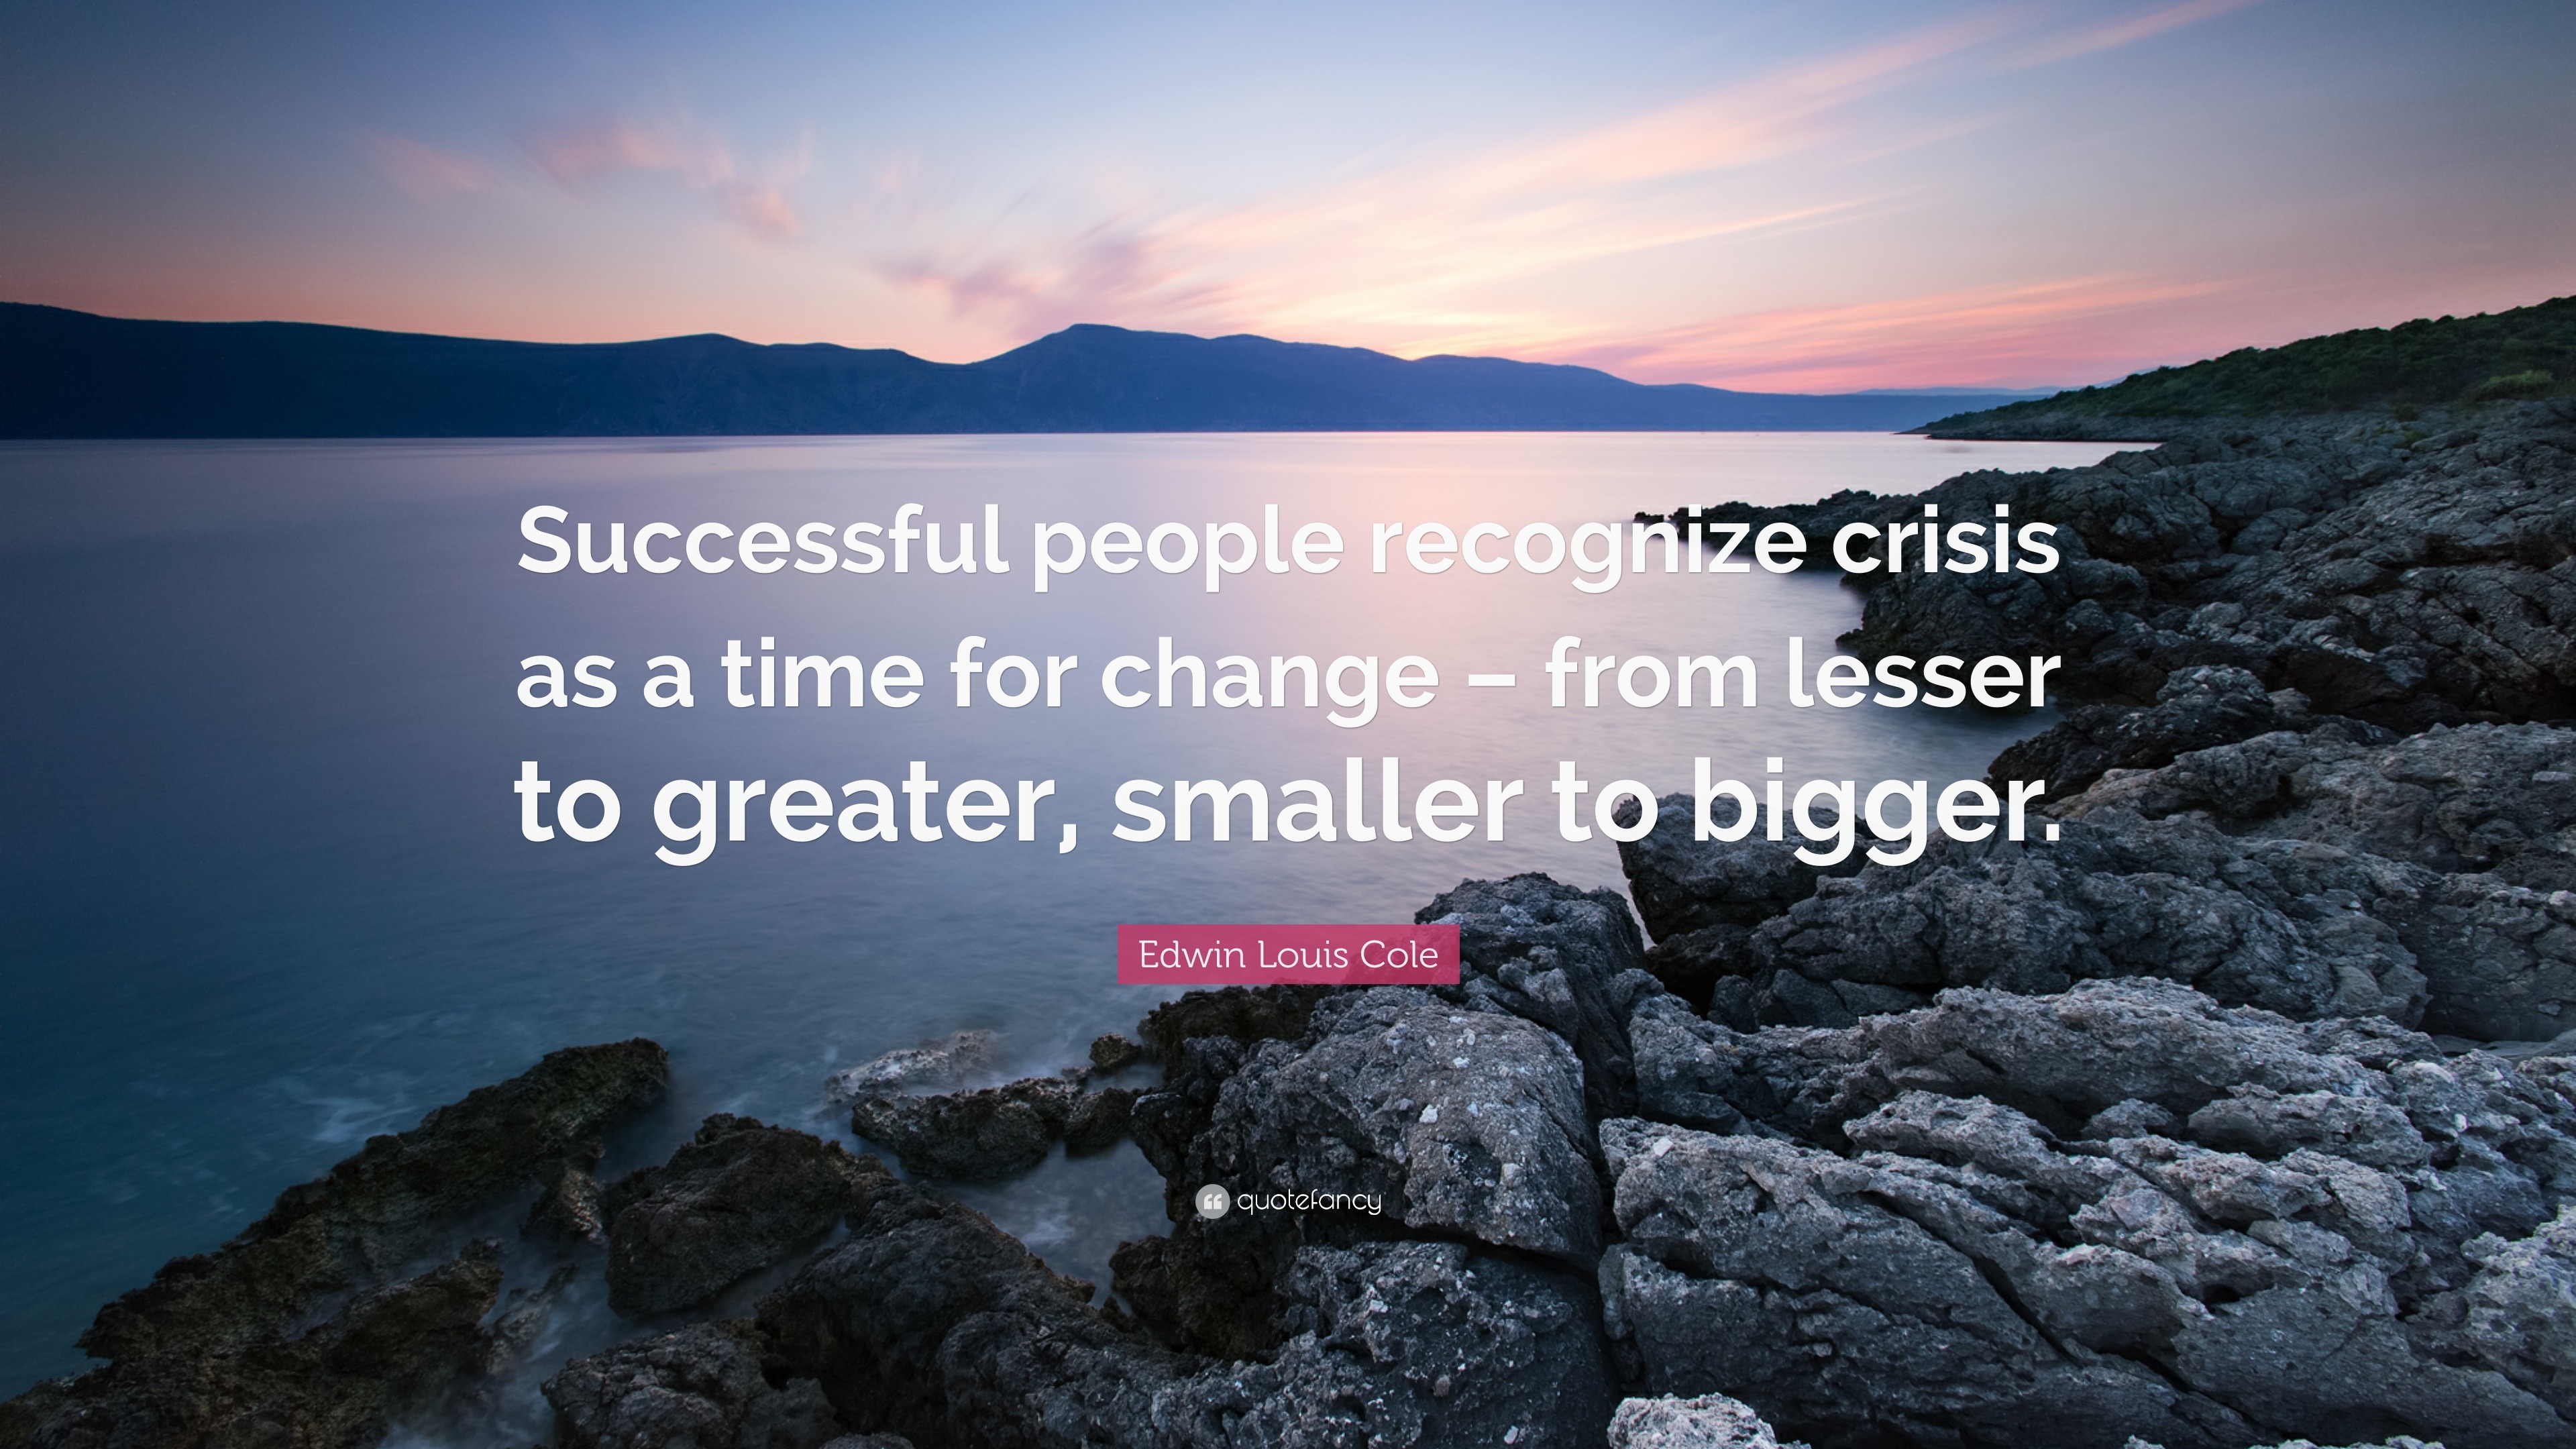 Edwin Louis Cole Quote: “Successful people recognize crisis as a time for  change – from lesser to